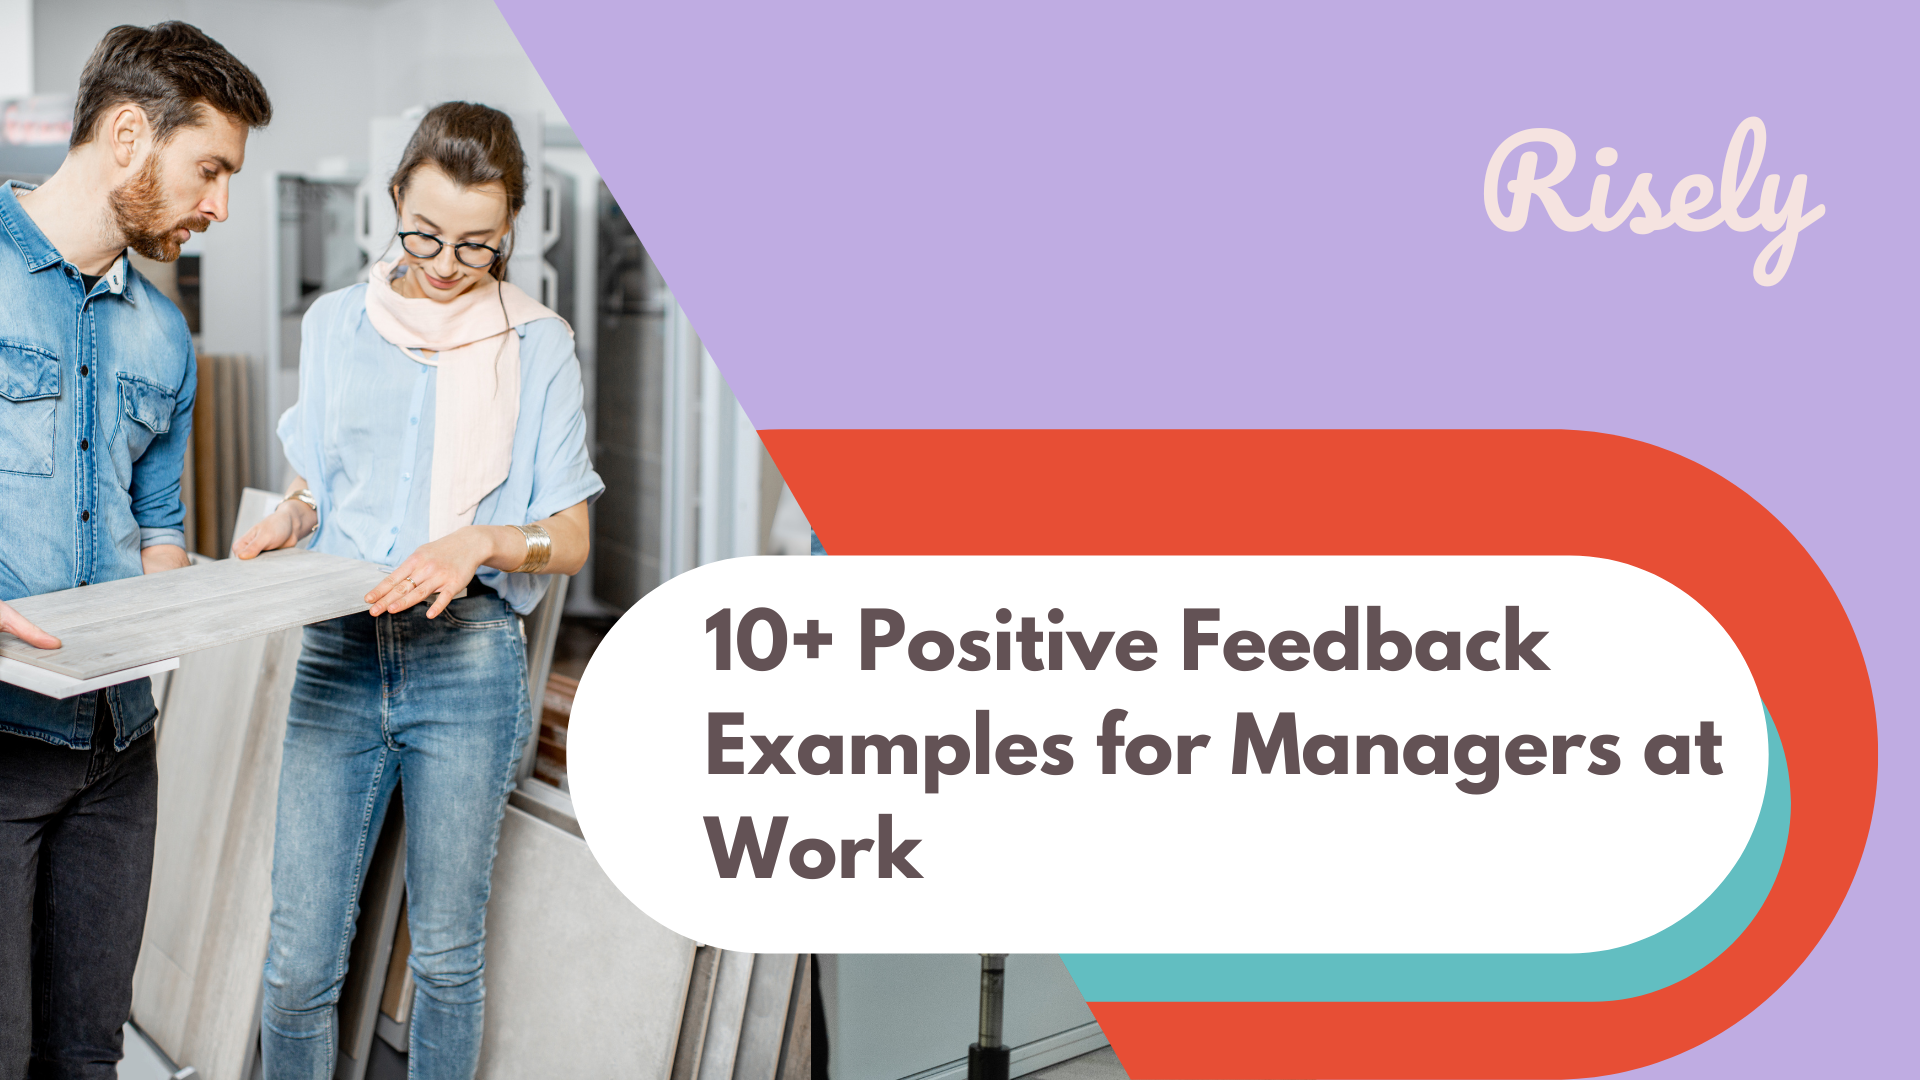 10+ Positive Feedback Examples for Managers at Work